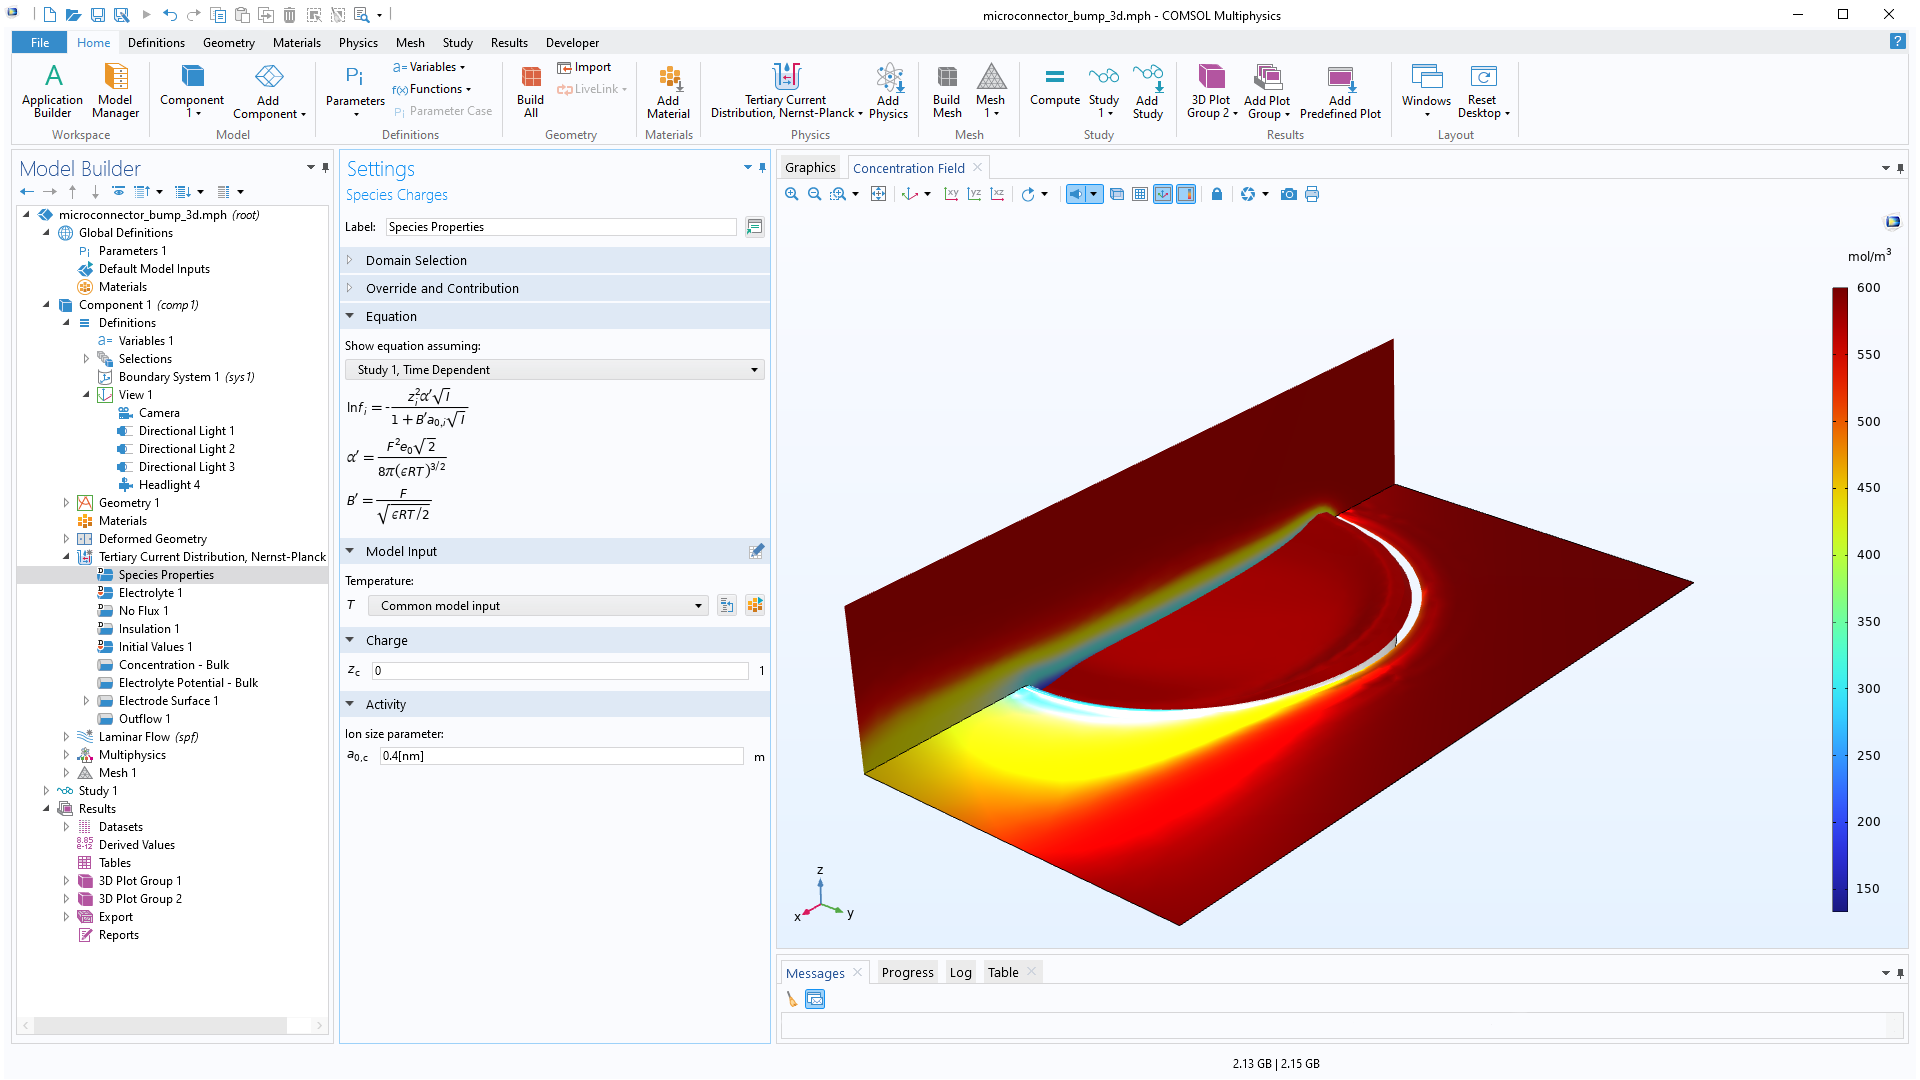 The COMSOL Multiphysics UI showing the Model Builder with the Species Charges node highlighted, the corresponding Settings window, and a microconnector bump model in the Graphics window.